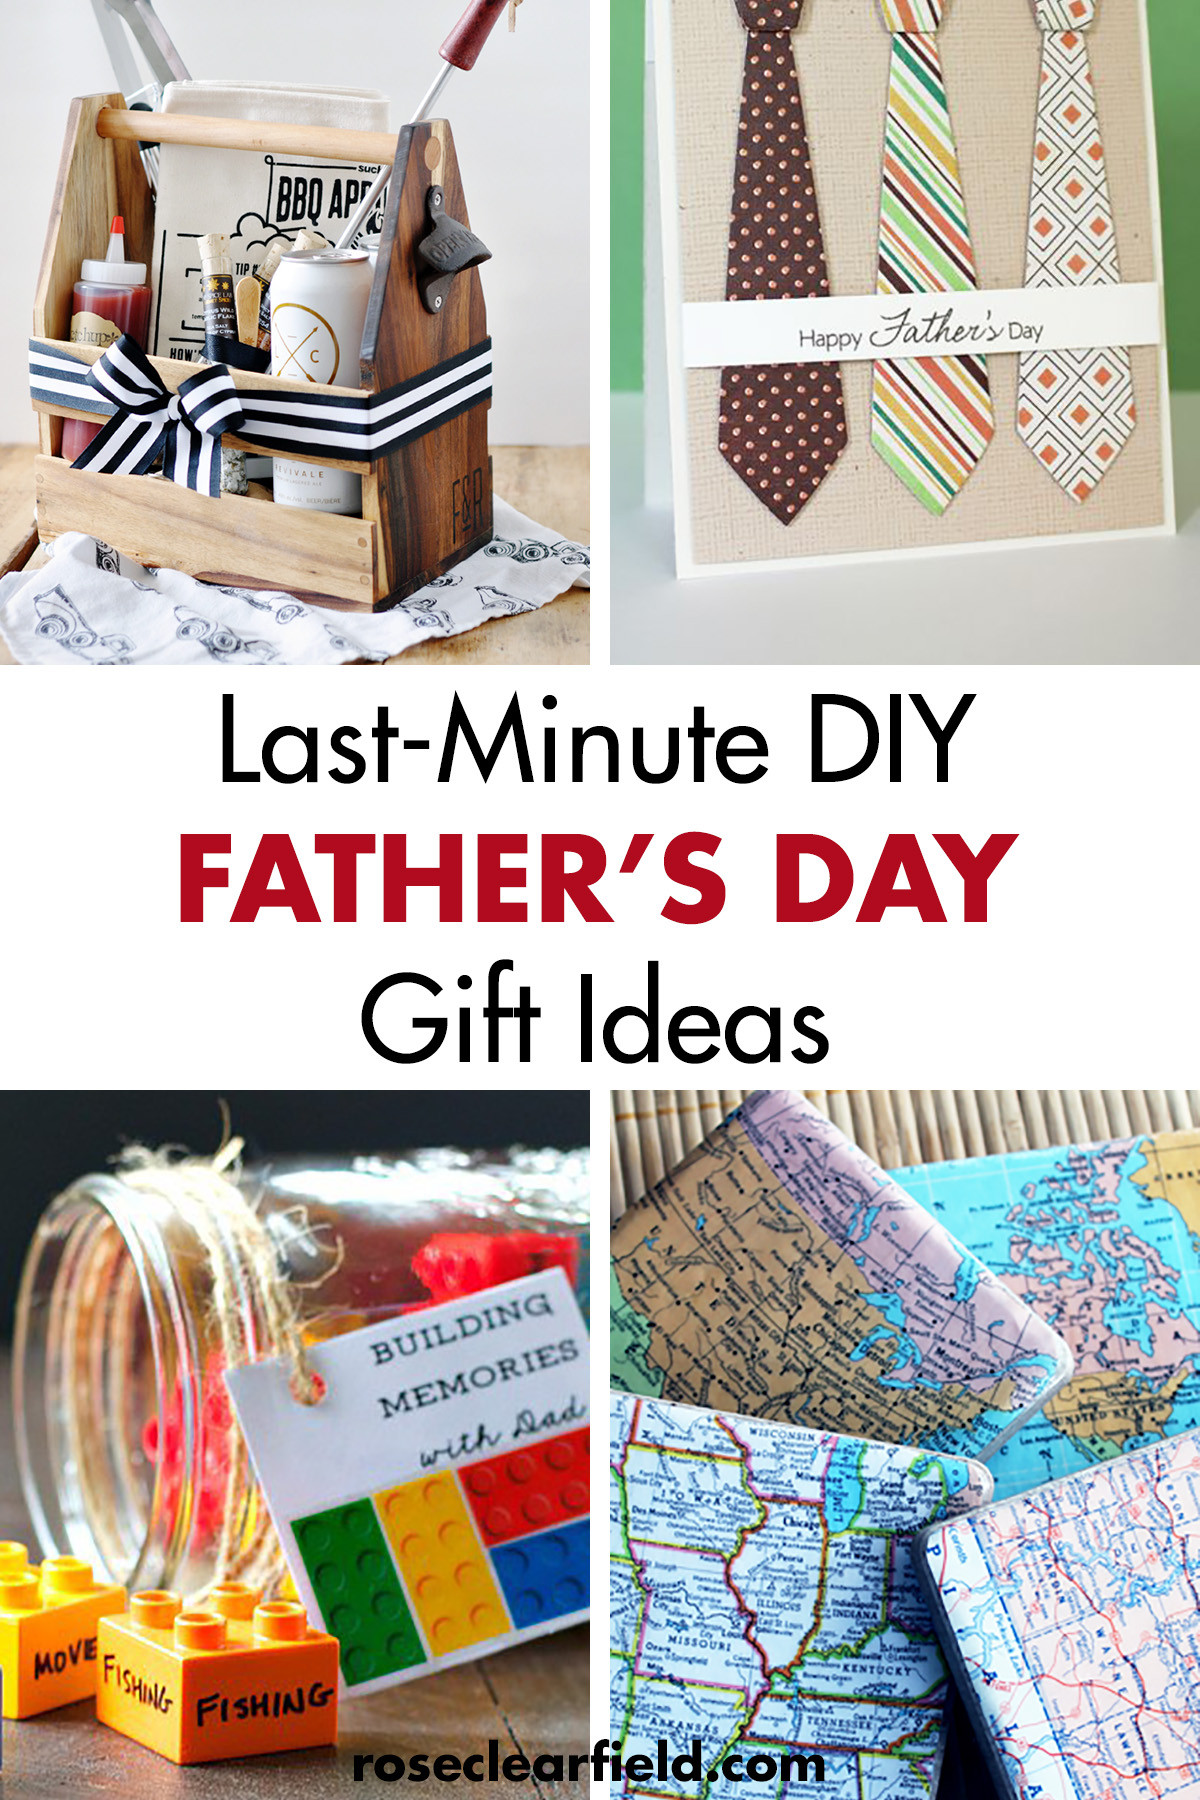 Fathers Day Gifts Ideas
 Last Minute DIY Father s Day Gift Ideas • Rose Clearfield